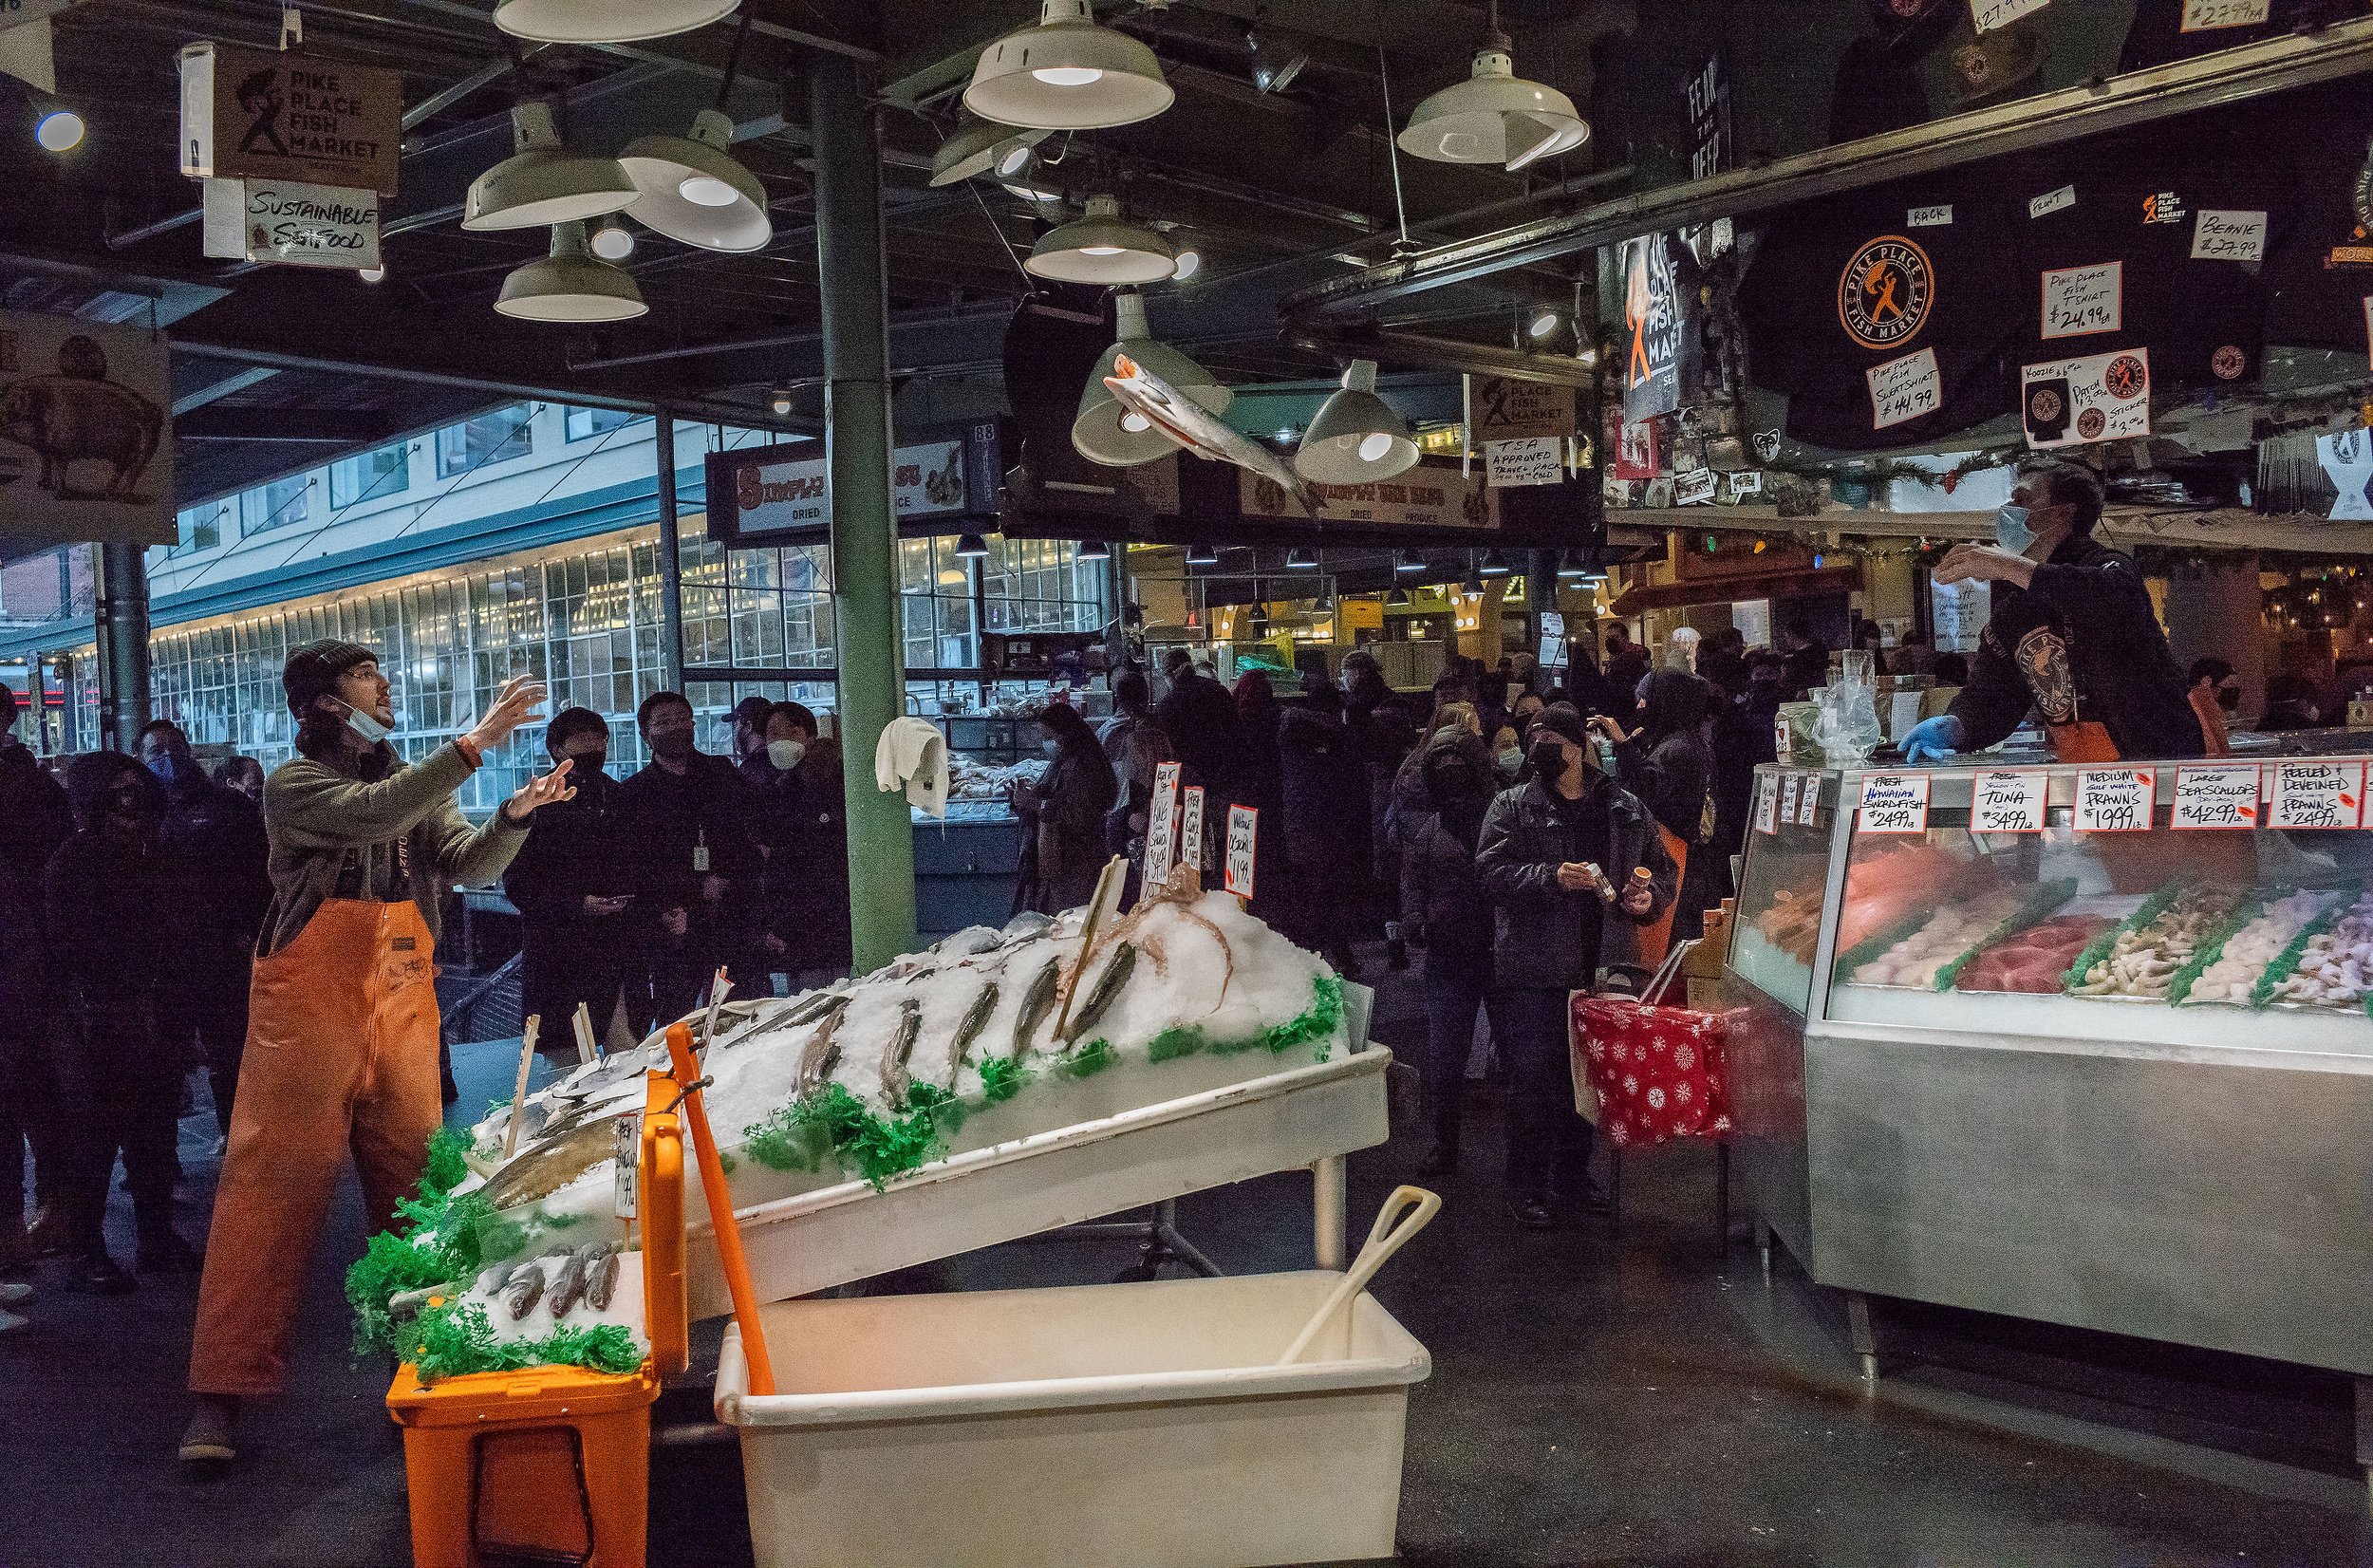  A silver (coho) salmon from Alaska is thrown at Pike Place Market in Seattle, Washington, USA on December 4, 2021. 